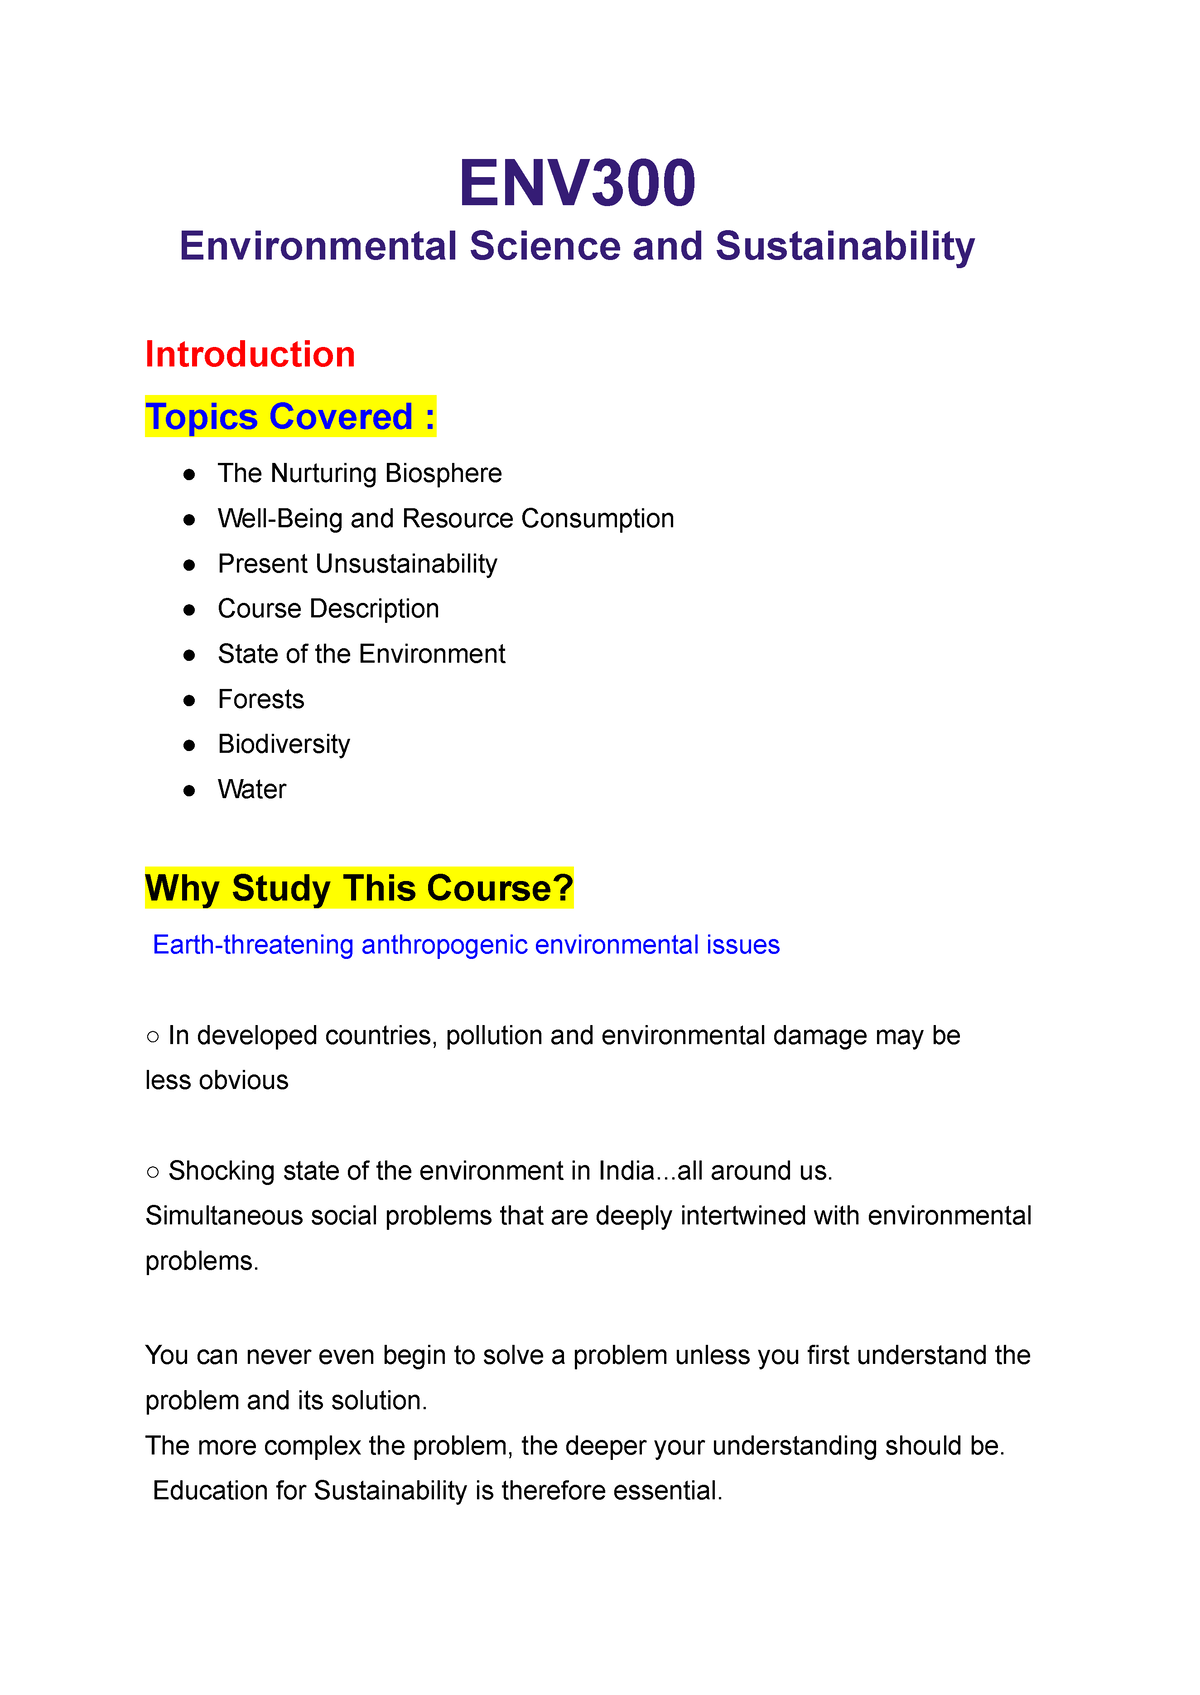 thesis about environmental science